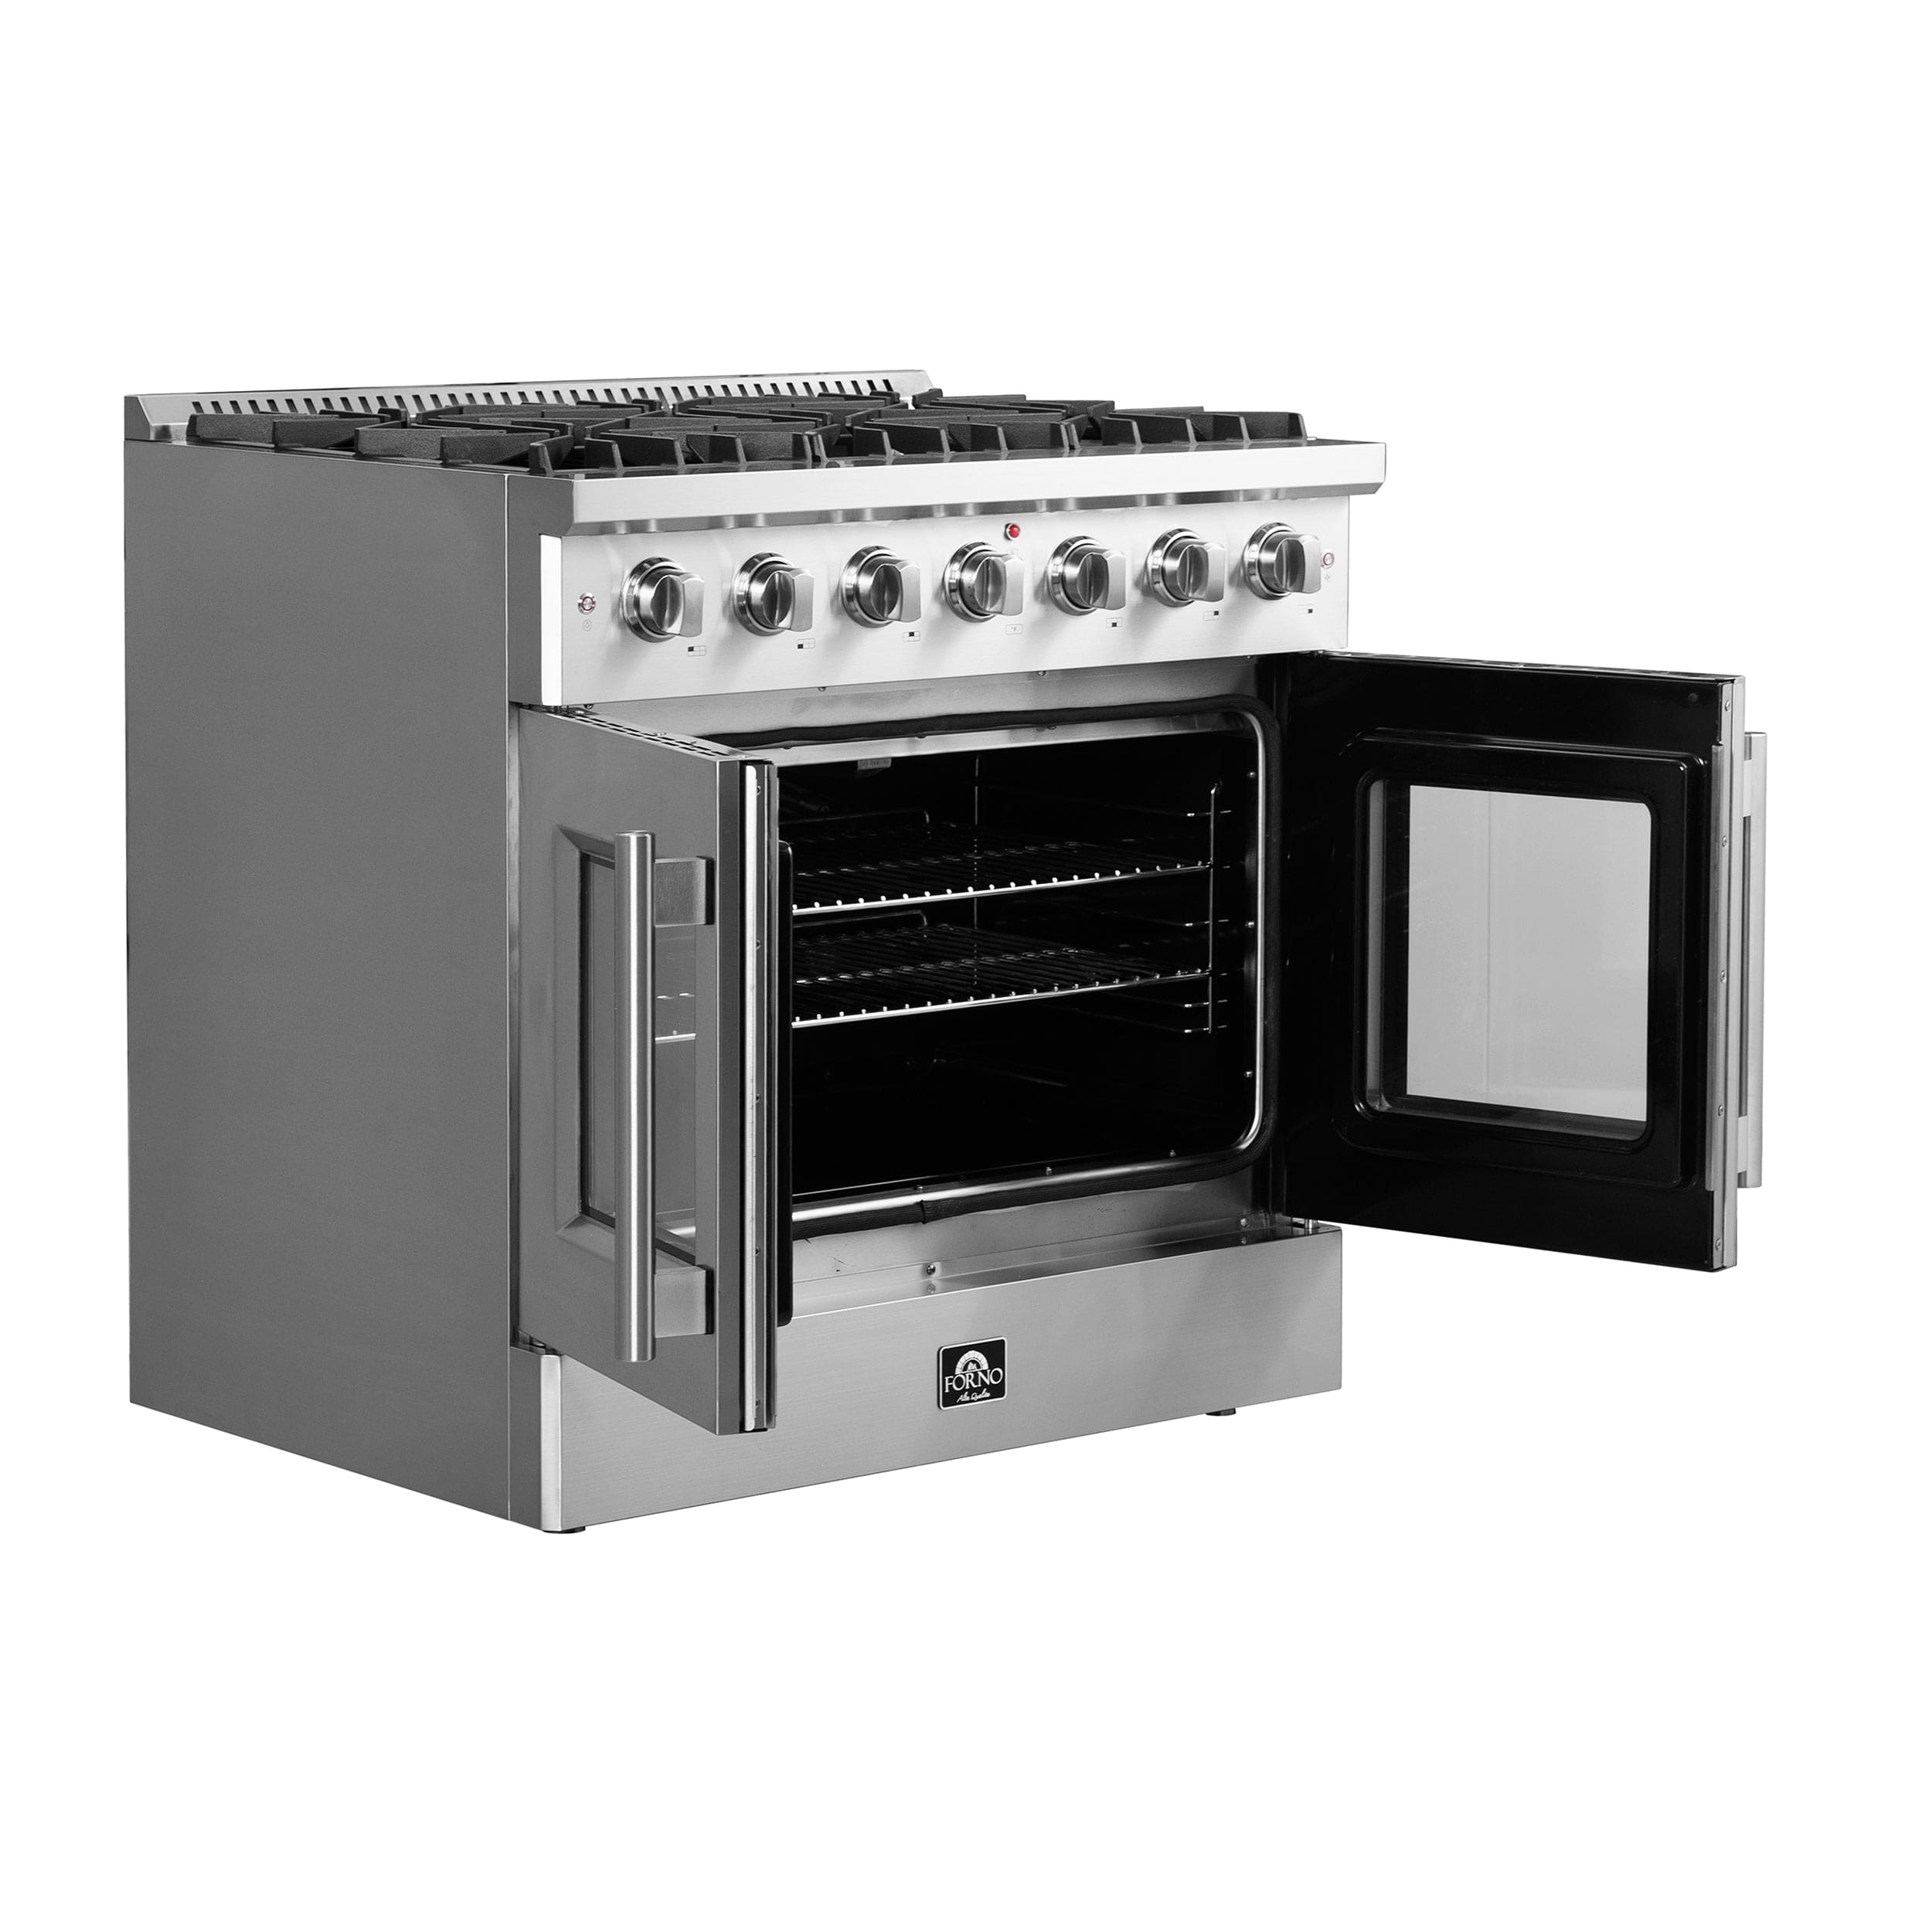 Forno Galiano 36" Freestanding Gas Range with French Door in Stainless Steel, FFSGS6444-36 Ranges FFSGS6444-36 Luxury Appliances Direct